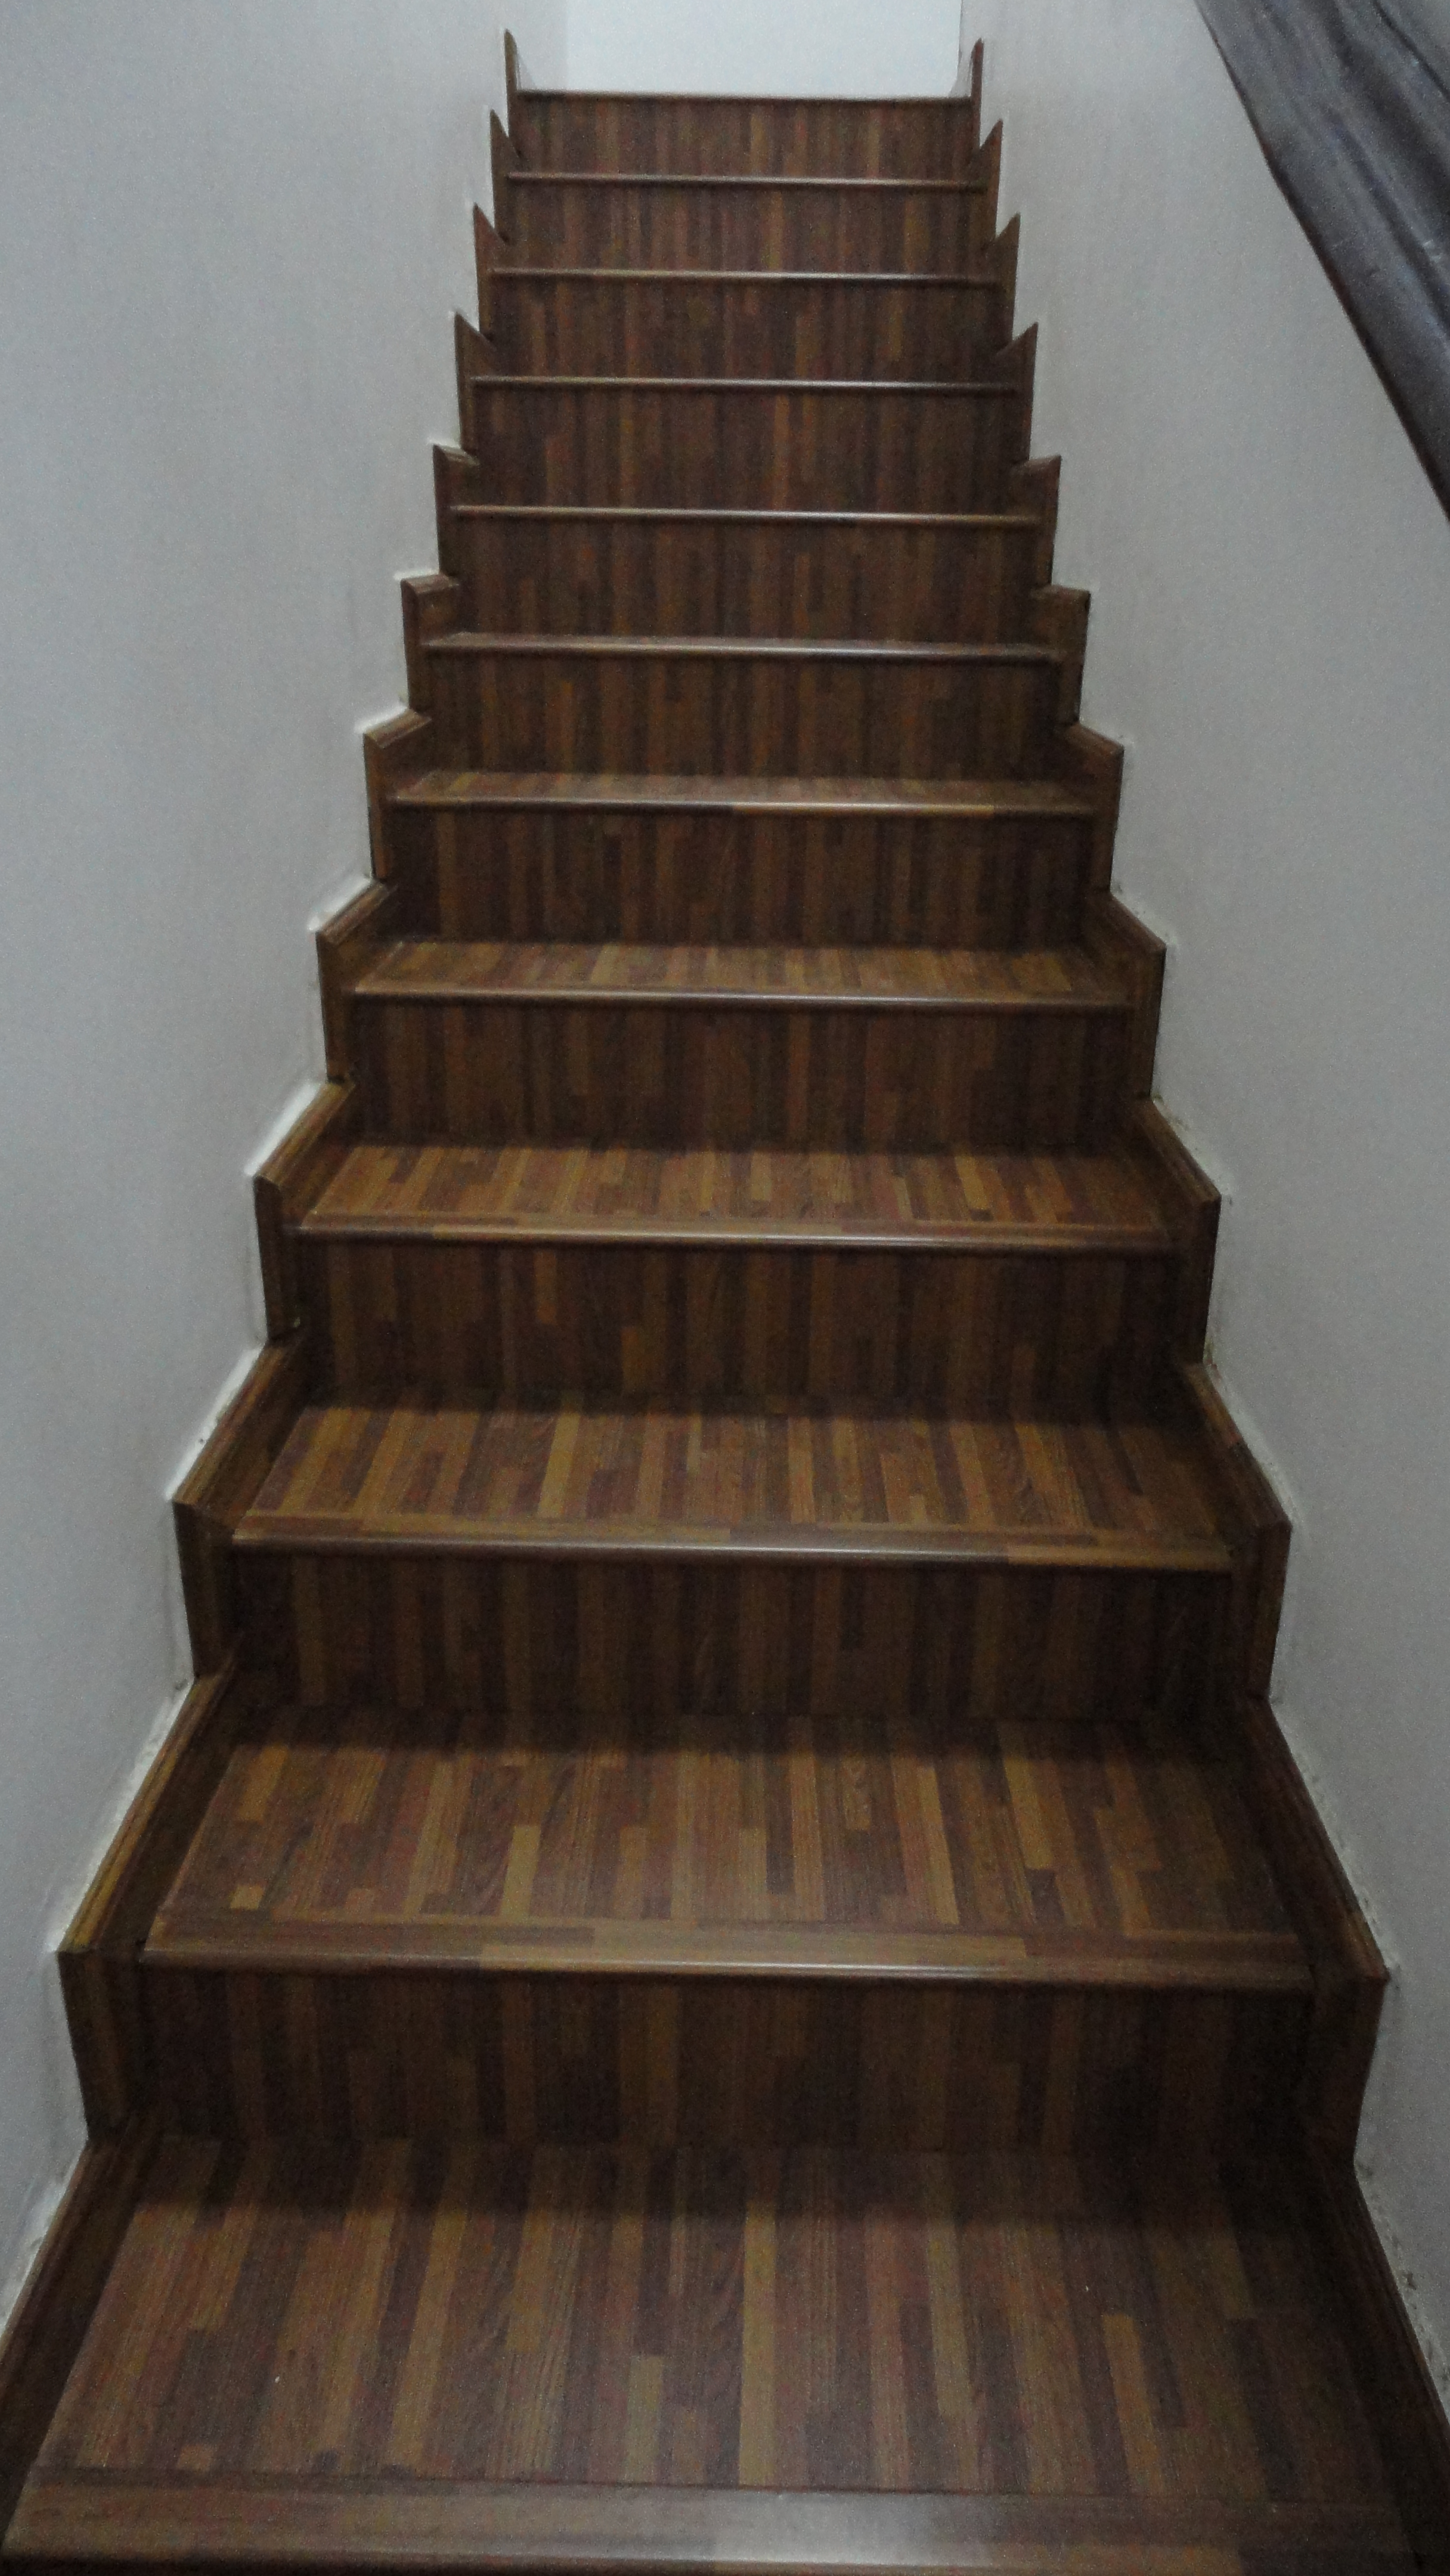 Laminated Wood Floor Tile  Basic - Nigeria's No.1 suppliers of wholesale  decor products